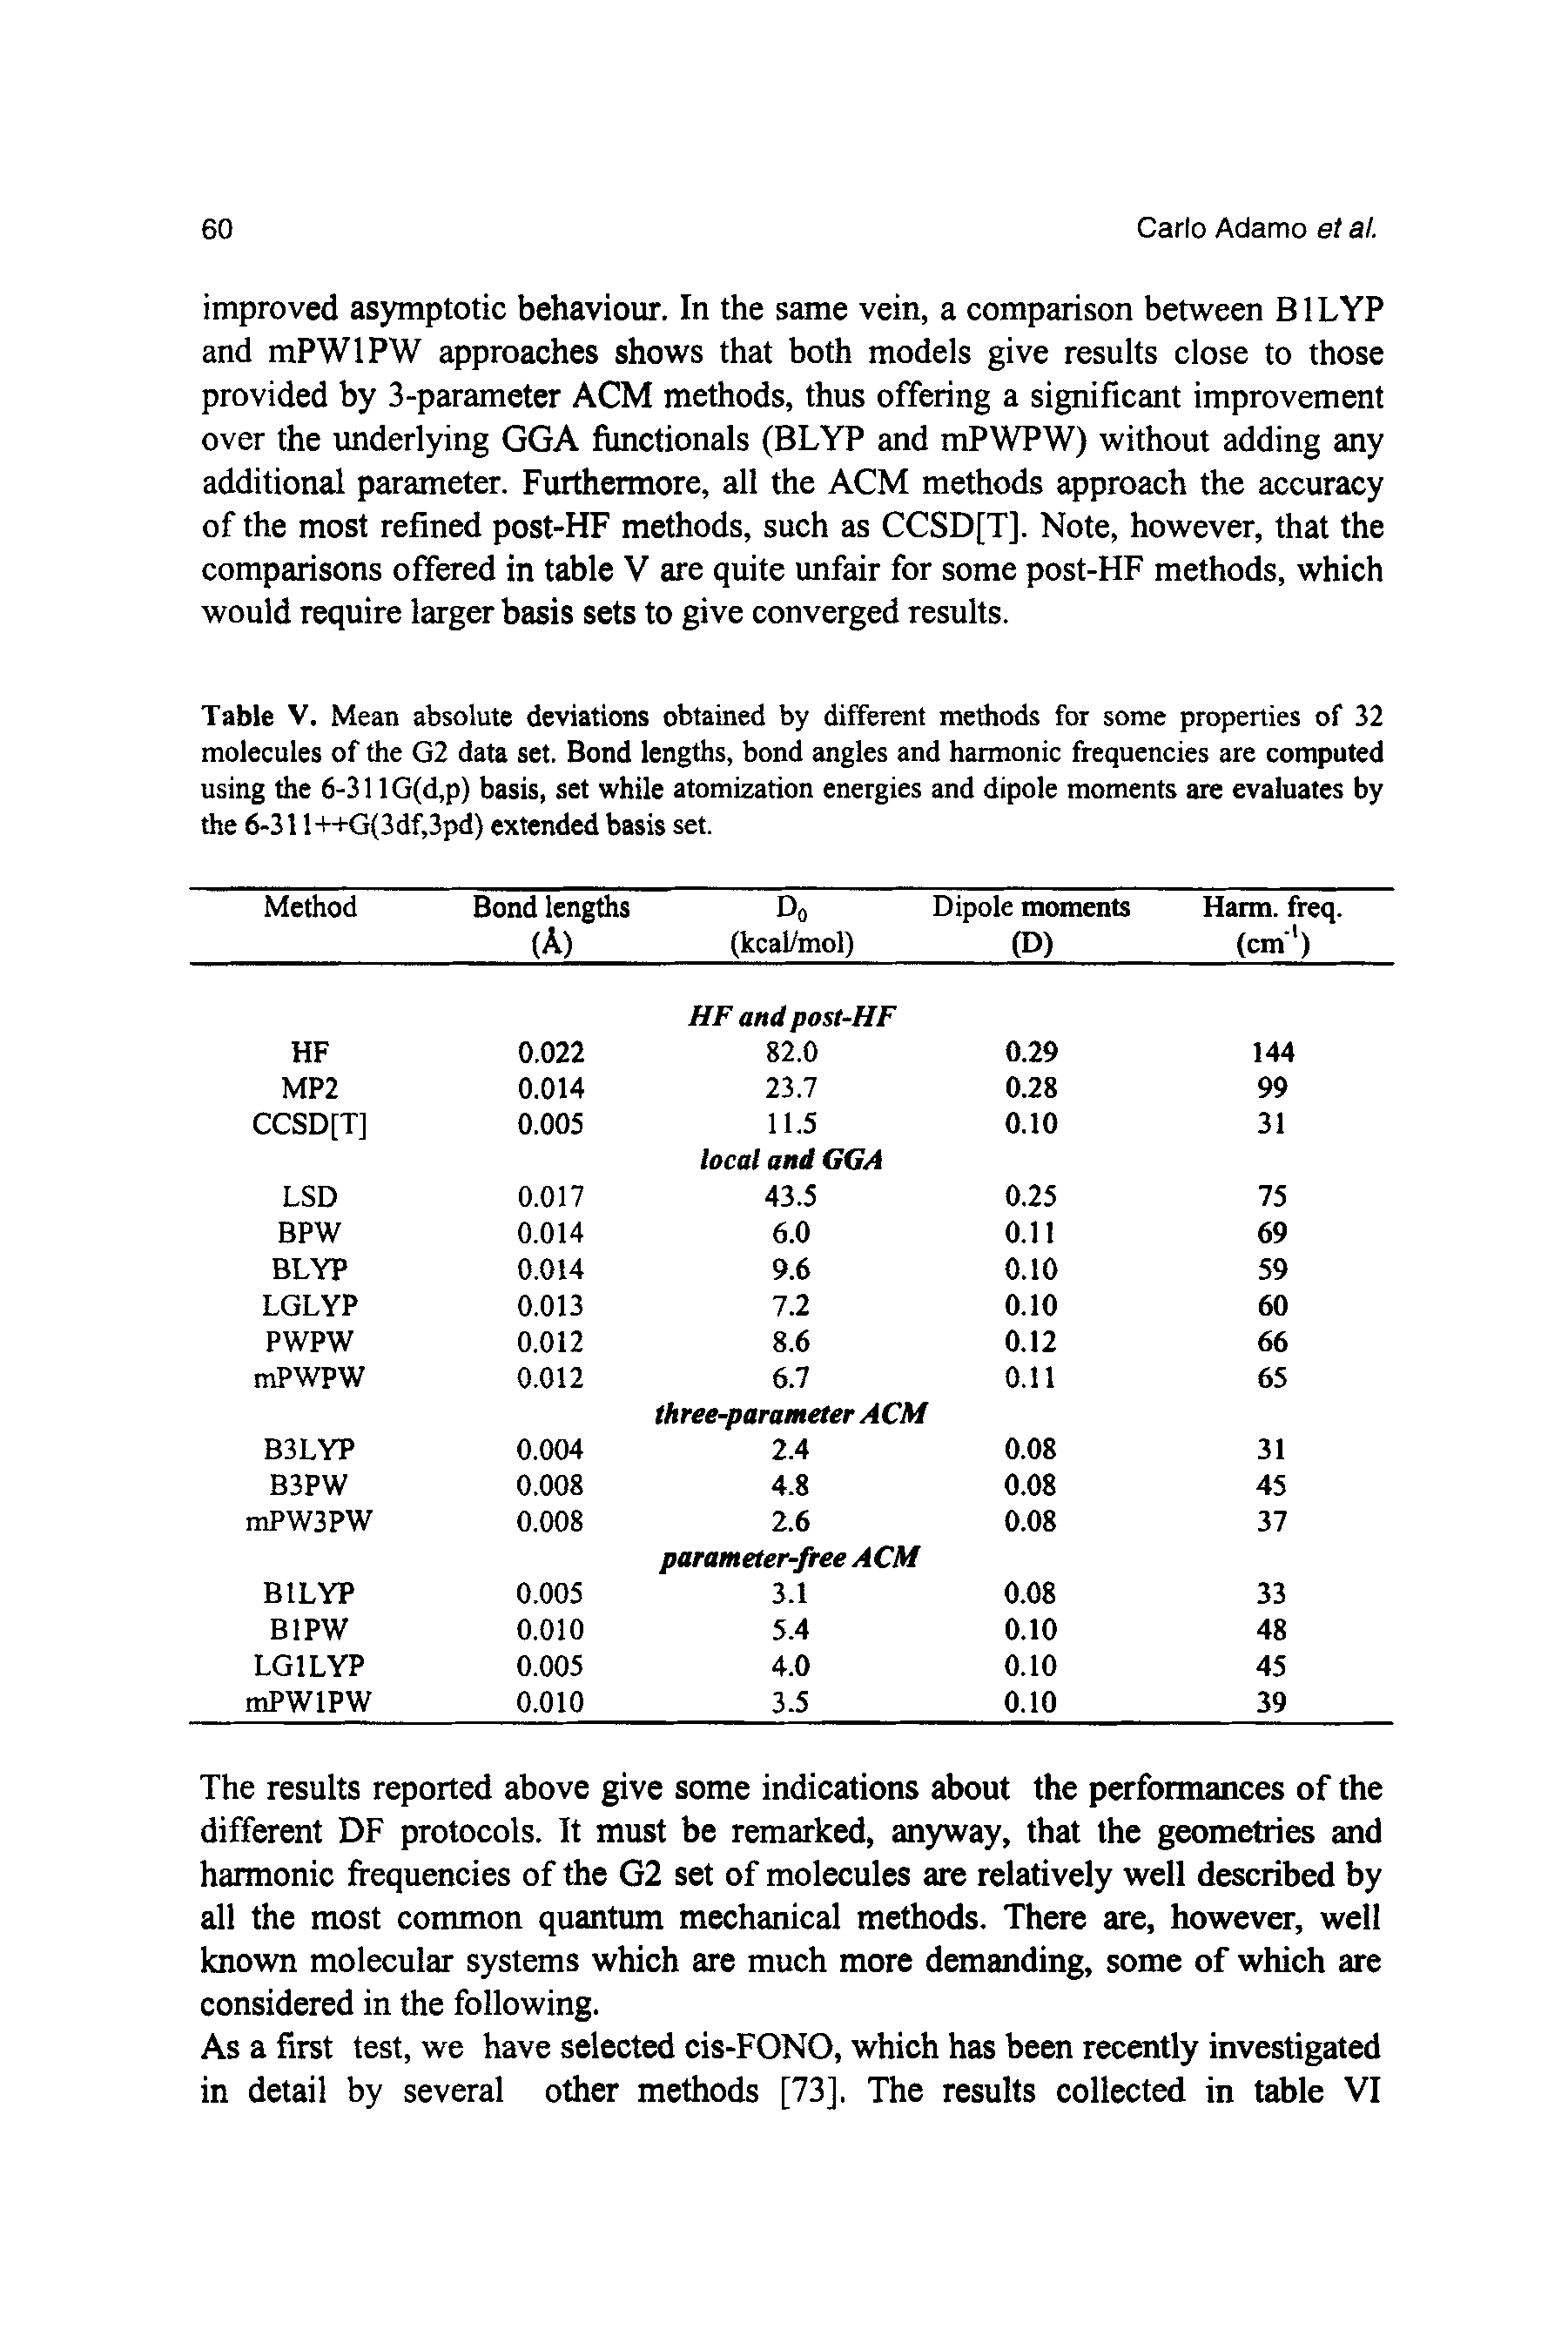 Table V. Mean absolute deviations obtained by different methods for some properties of 32 molecules of the G2 data set. Bond lengths, bond angles and harmonic frequencies are computed using the 6-31 lG(d,p) basis, set while atomization energies and dipole moments are evaluates by the 6-311++G(3df,3pd) extended basis set.